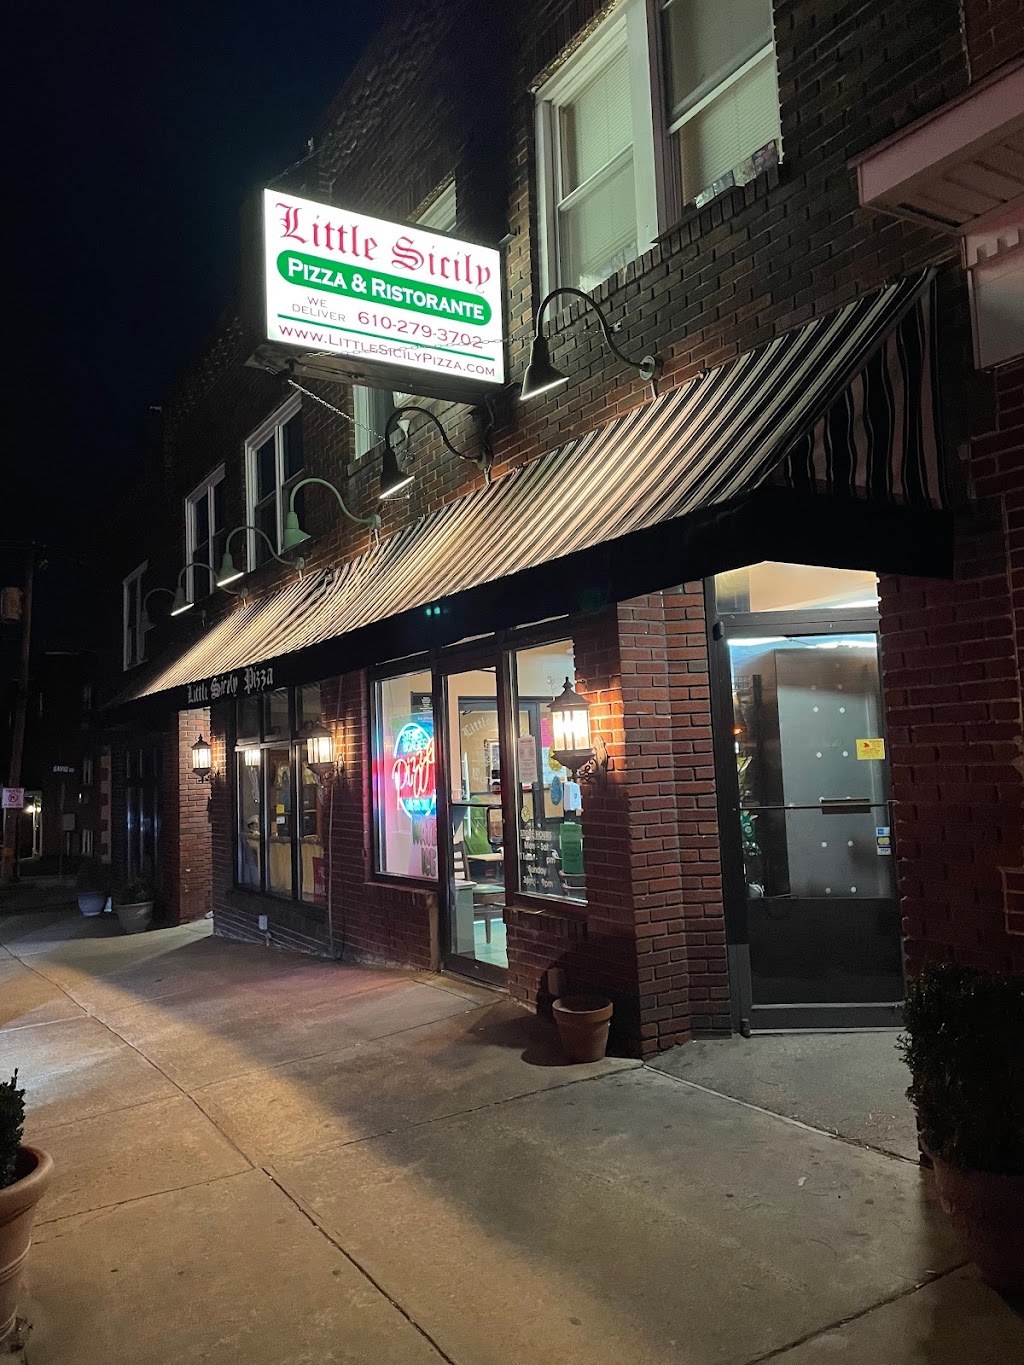 Little Sicily Pizza | 26 Crooked Ln, King of Prussia, PA 19406 | Phone: (610) 279-3702